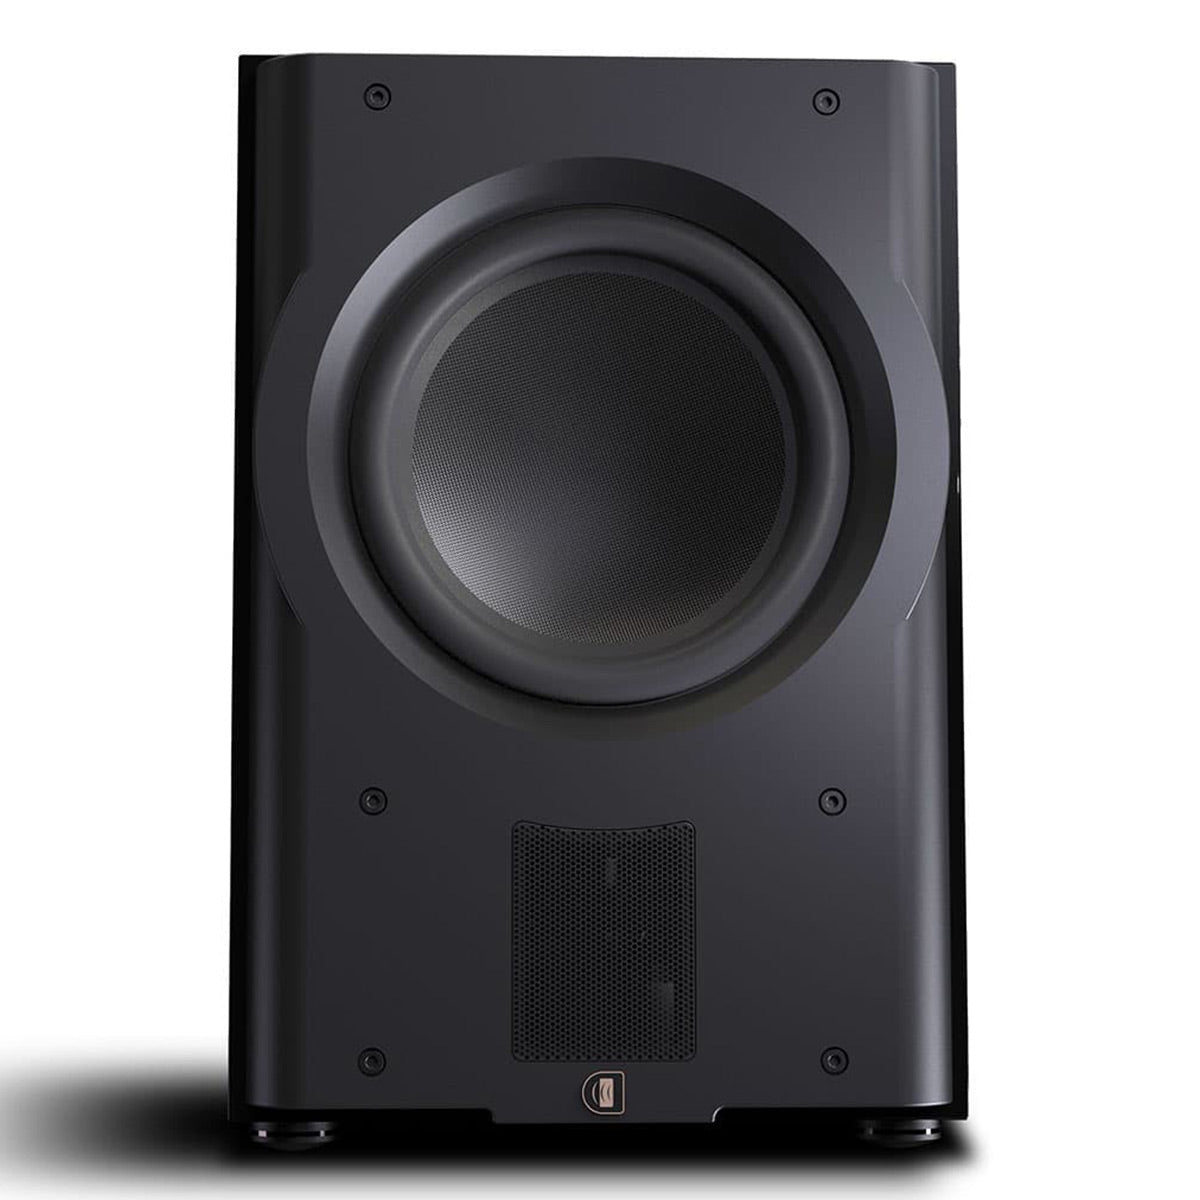 Perlisten Audio R210s 10" Subwoofer with LCD Touchscreen Display (Piano Black)